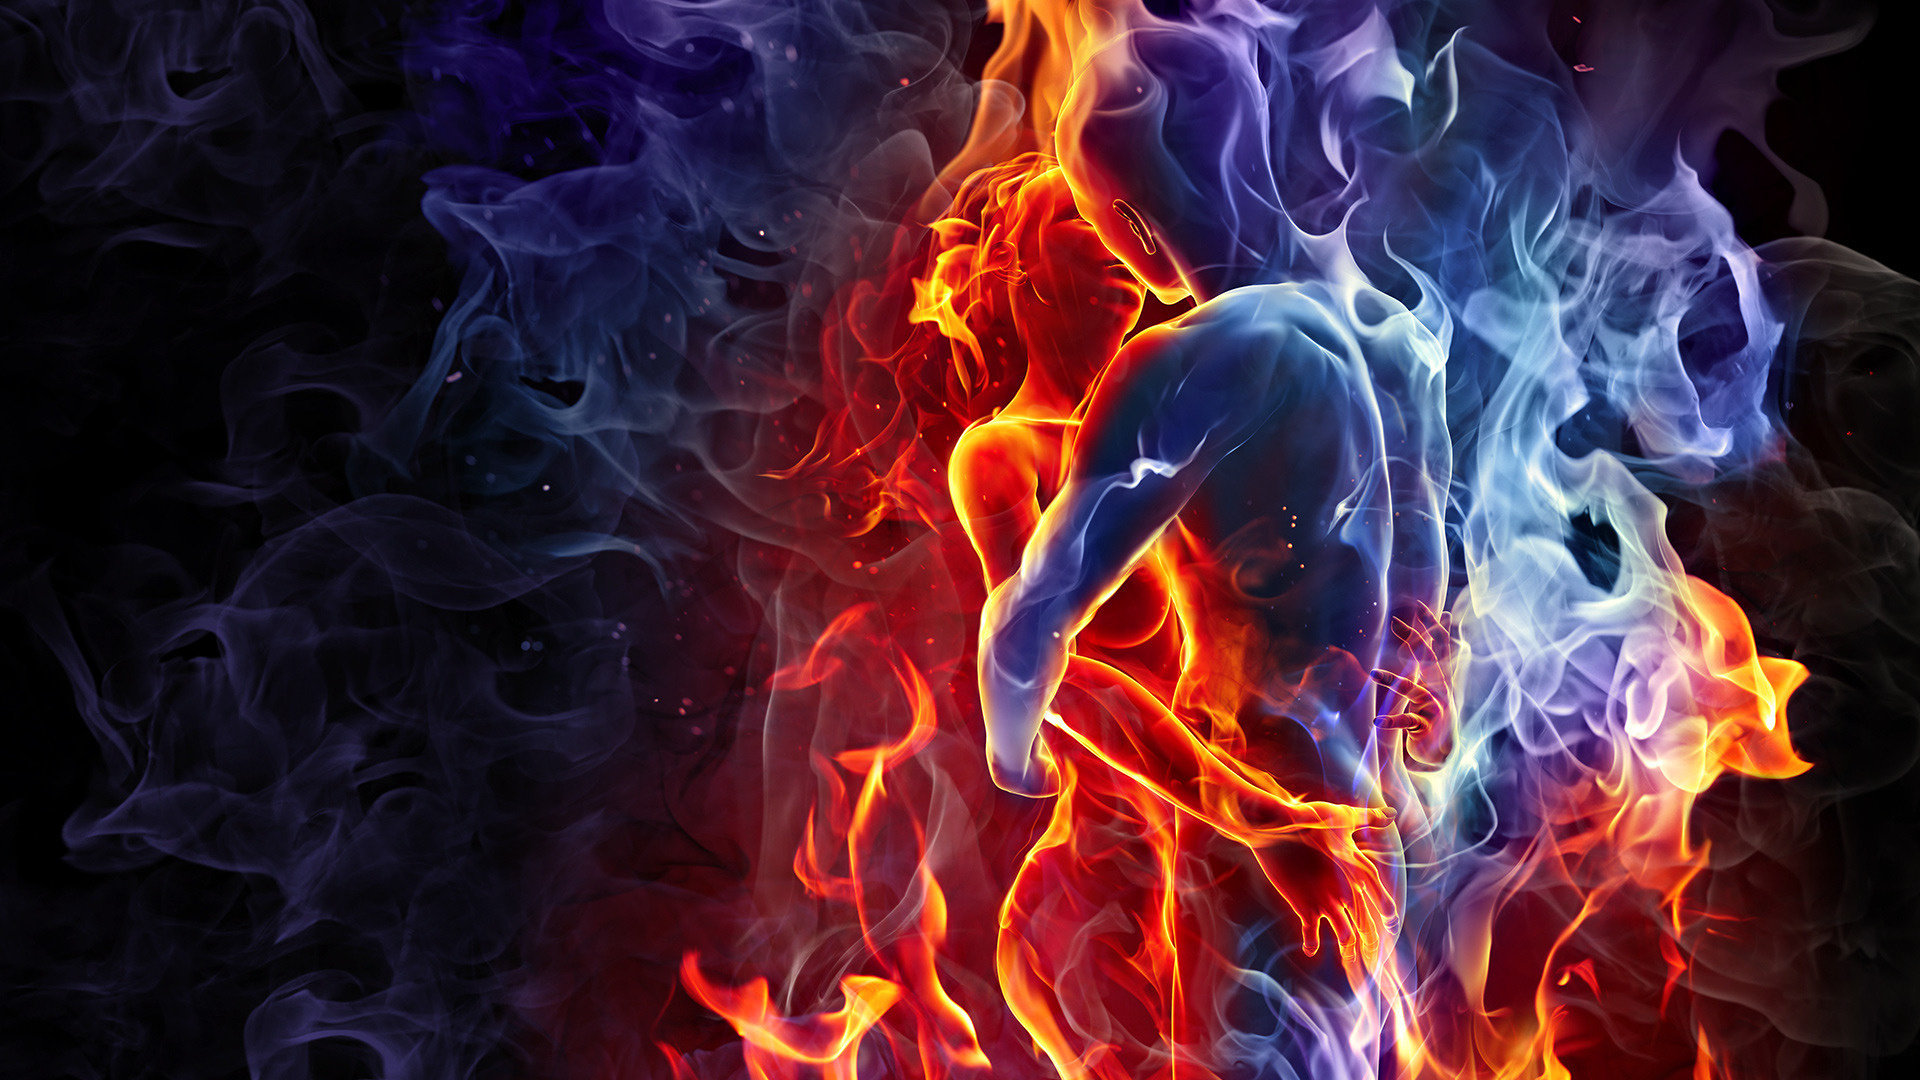 Download 1080p Fire PC wallpaper ID:165447 for free